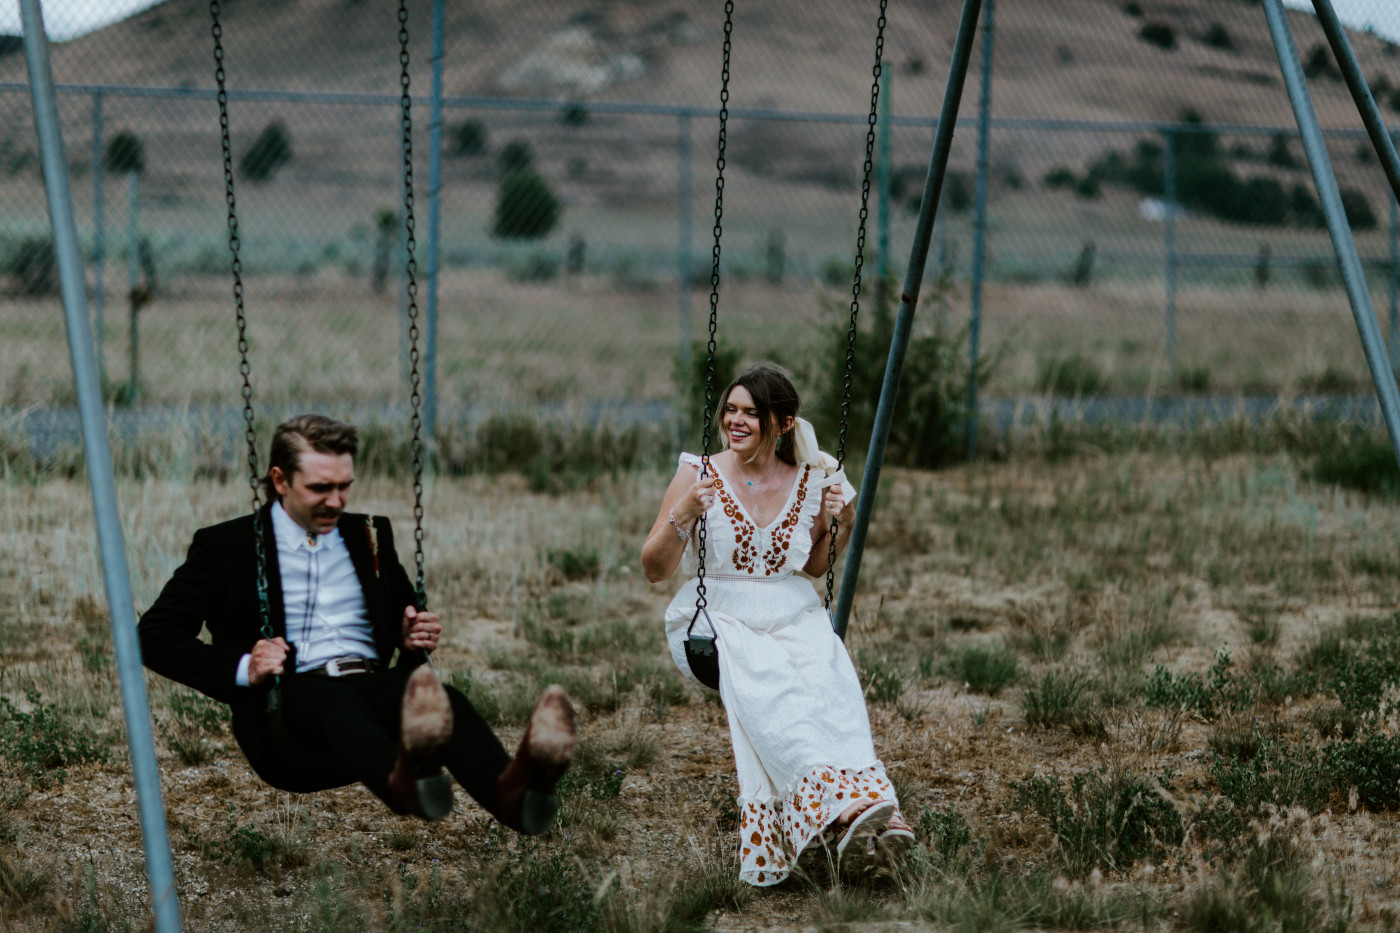 Greyson and Emily swing. Elopement photography in the Central Oregon desert by Sienna Plus Josh.